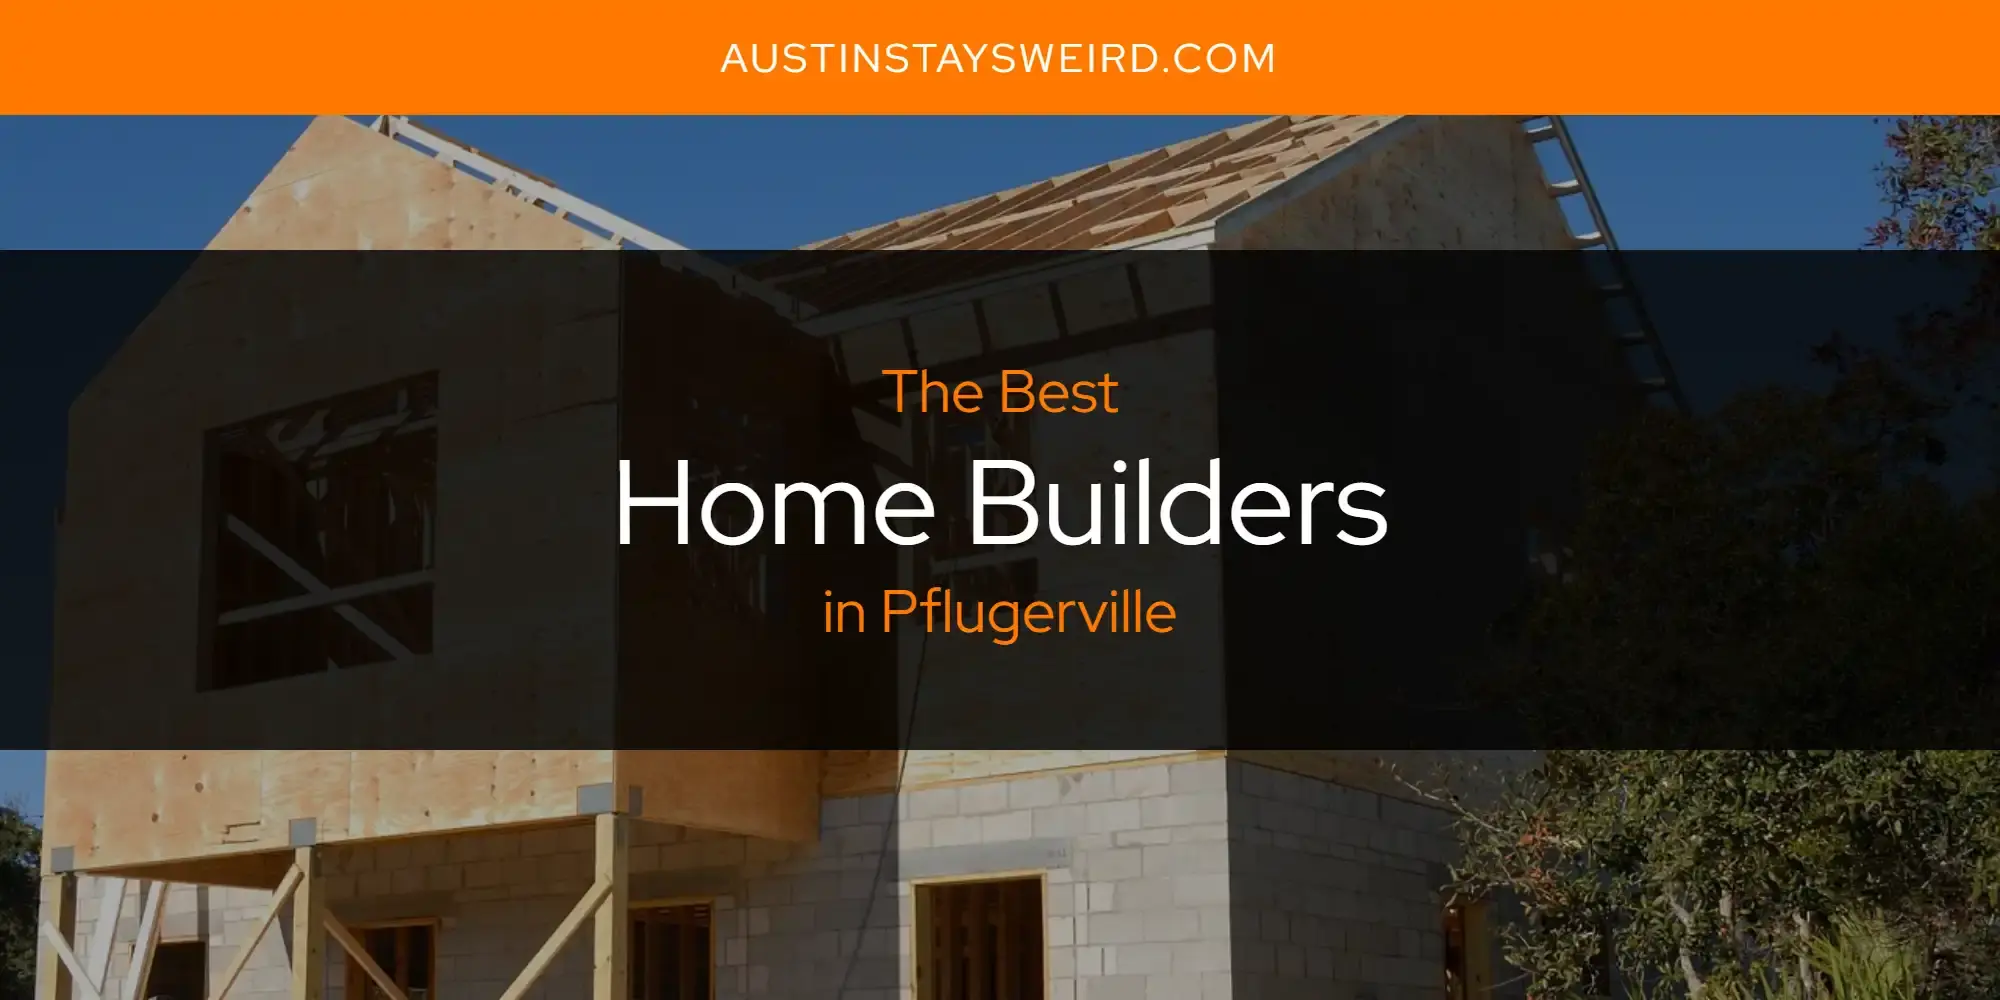 Best Home Builders in Pflugerville? Here's the Top 8